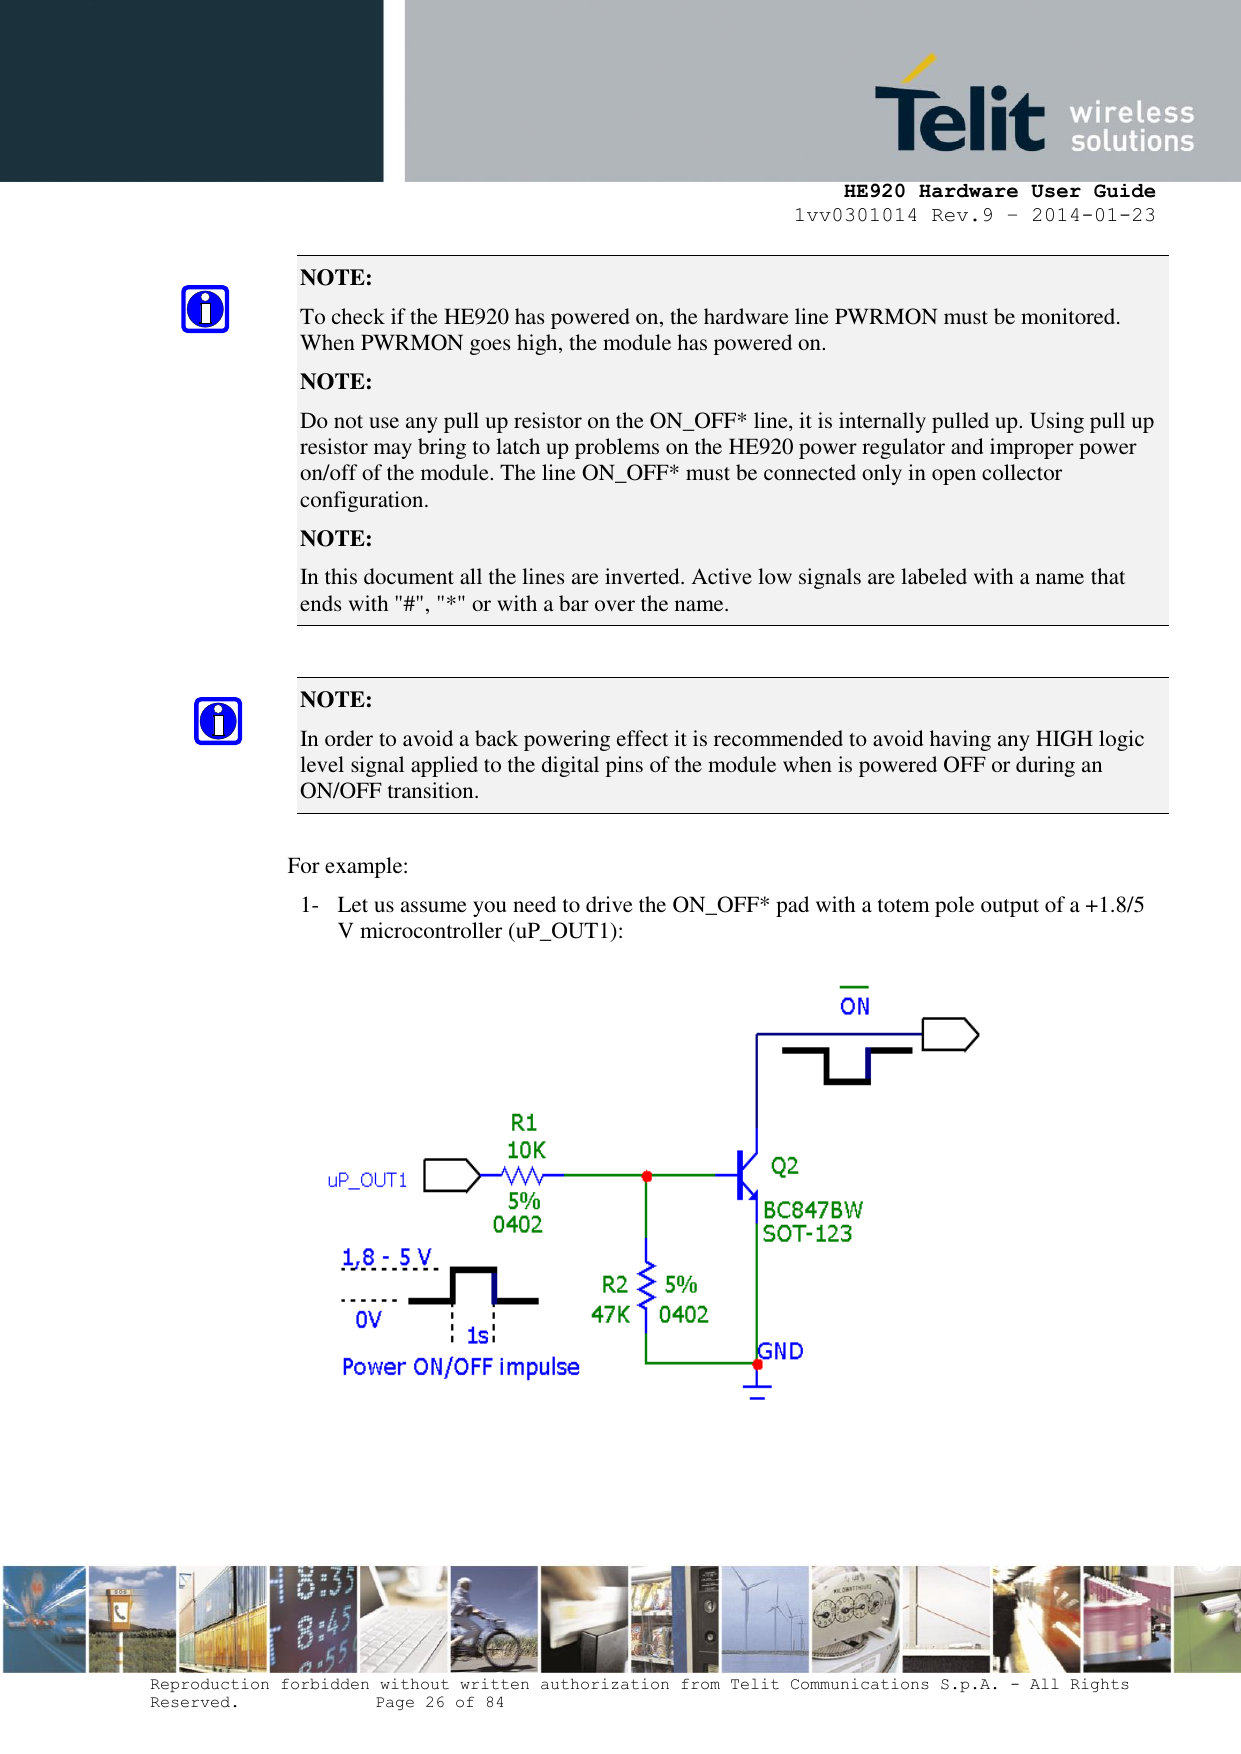     HE920 Hardware User Guide 1vv0301014 Rev.9 – 2014-01-23 Reproduction forbidden without written authorization from Telit Communications S.p.A. - All Rights Reserved.    Page 26 of 84  NOTE:  To check if the HE920 has powered on, the hardware line PWRMON must be monitored. When PWRMON goes high, the module has powered on. NOTE:  Do not use any pull up resistor on the ON_OFF* line, it is internally pulled up. Using pull up resistor may bring to latch up problems on the HE920 power regulator and improper power on/off of the module. The line ON_OFF* must be connected only in open collector configuration. NOTE:  In this document all the lines are inverted. Active low signals are labeled with a name that ends with &quot;#&quot;, &quot;*&quot; or with a bar over the name.  NOTE:  In order to avoid a back powering effect it is recommended to avoid having any HIGH logic level signal applied to the digital pins of the module when is powered OFF or during an ON/OFF transition.  For example: 1- Let us assume you need to drive the ON_OFF* pad with a totem pole output of a +1.8/5 V microcontroller (uP_OUT1):    